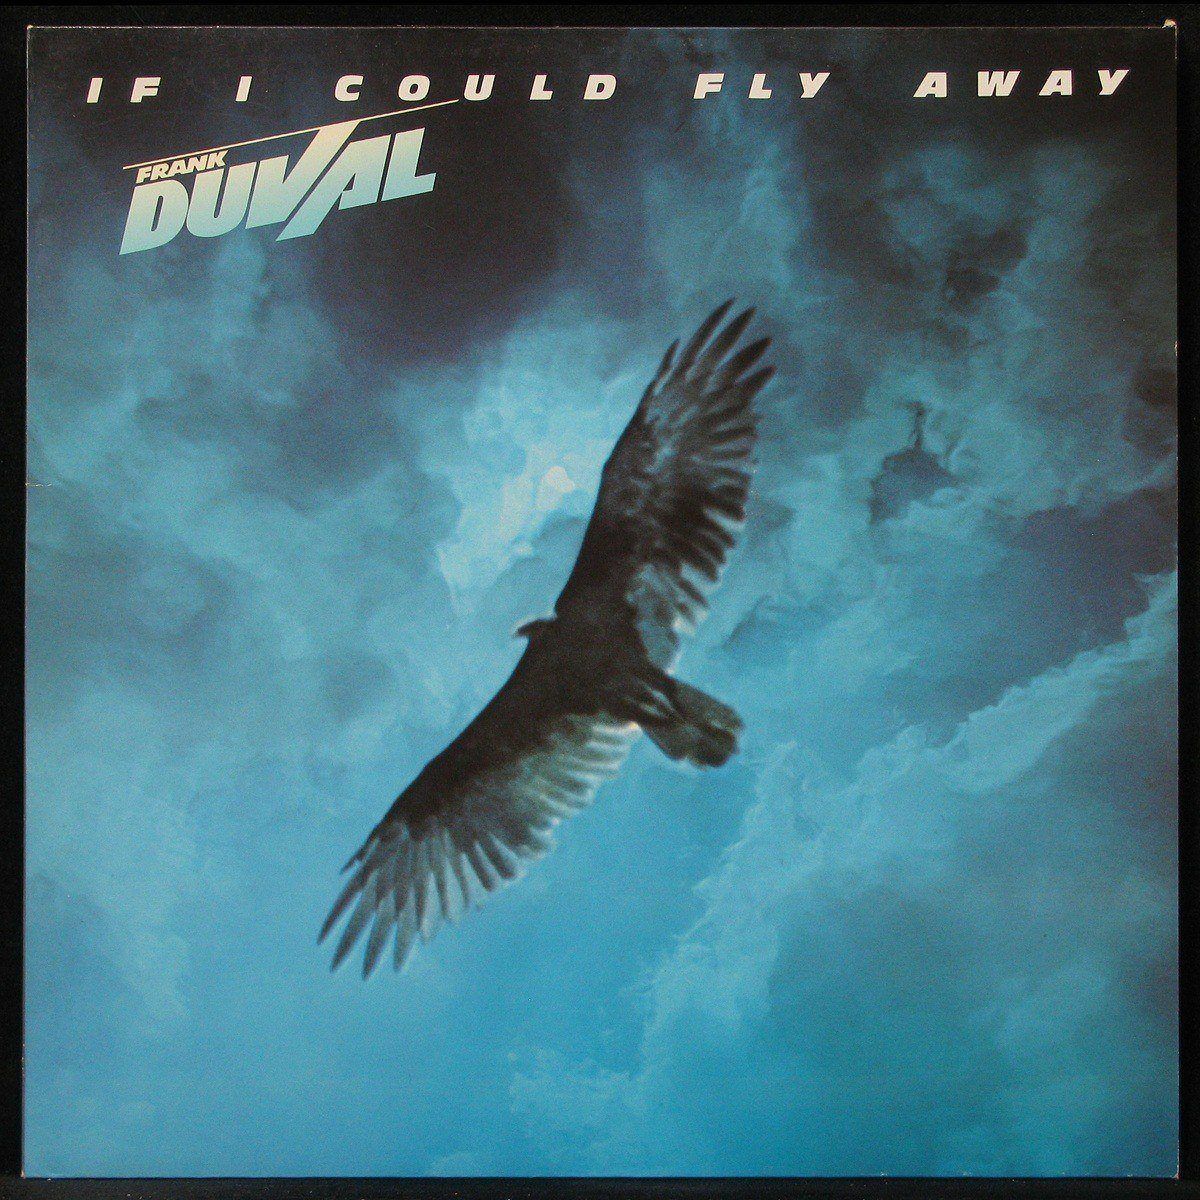 LP Frank Duval — If I Could Fly Away фото